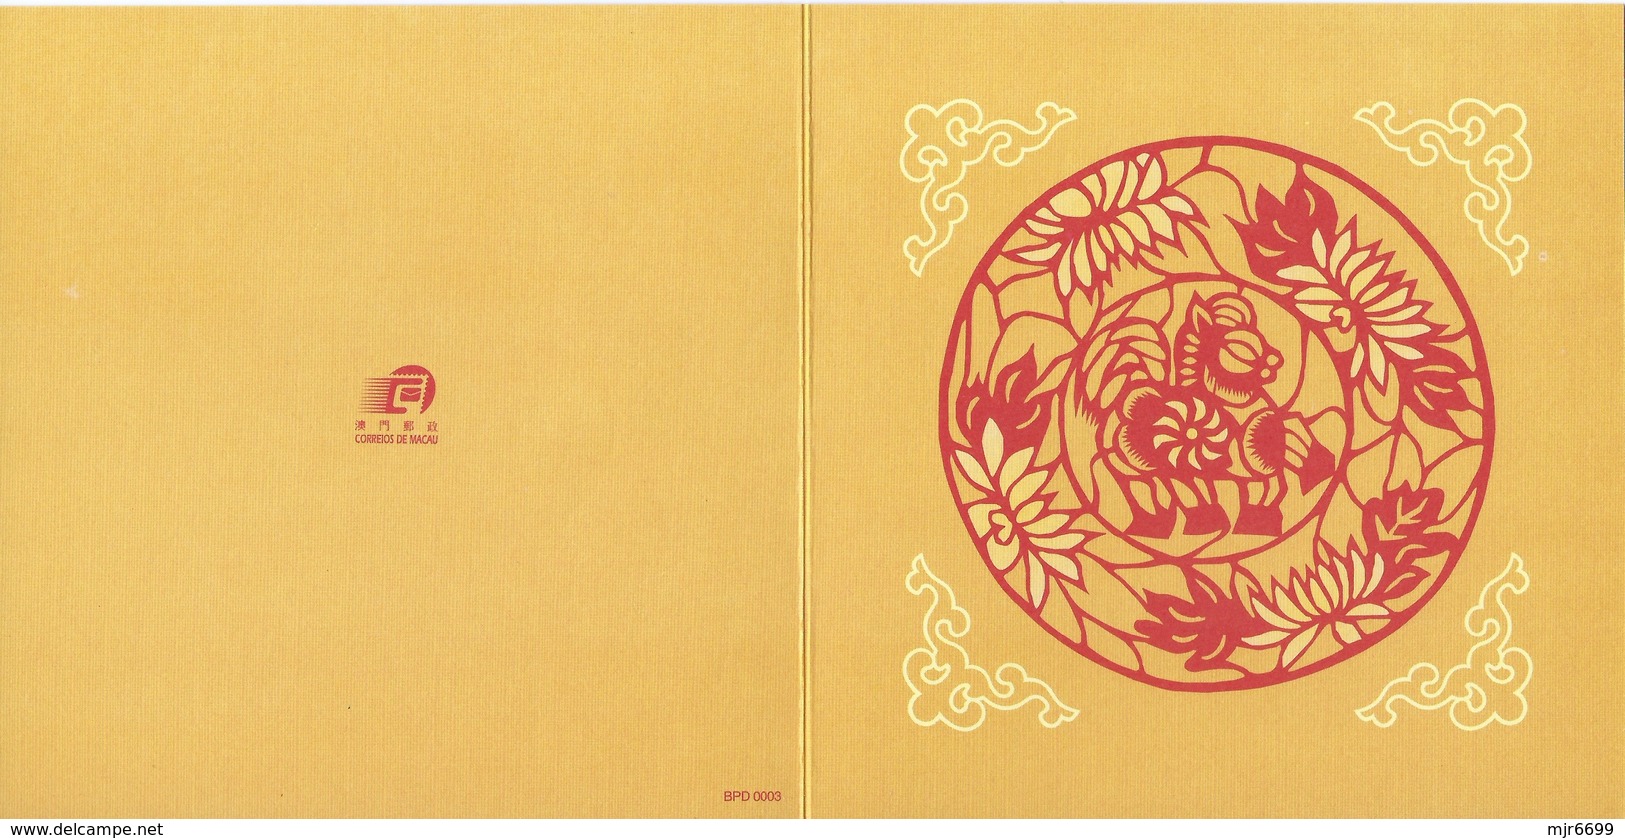 MACAU 2002 LUNAR NEW YEAR OF THE HORSE GREETING CARD & POSTAGE PAID COVER,  POST OFFICE CODE #BPD003 - Entiers Postaux